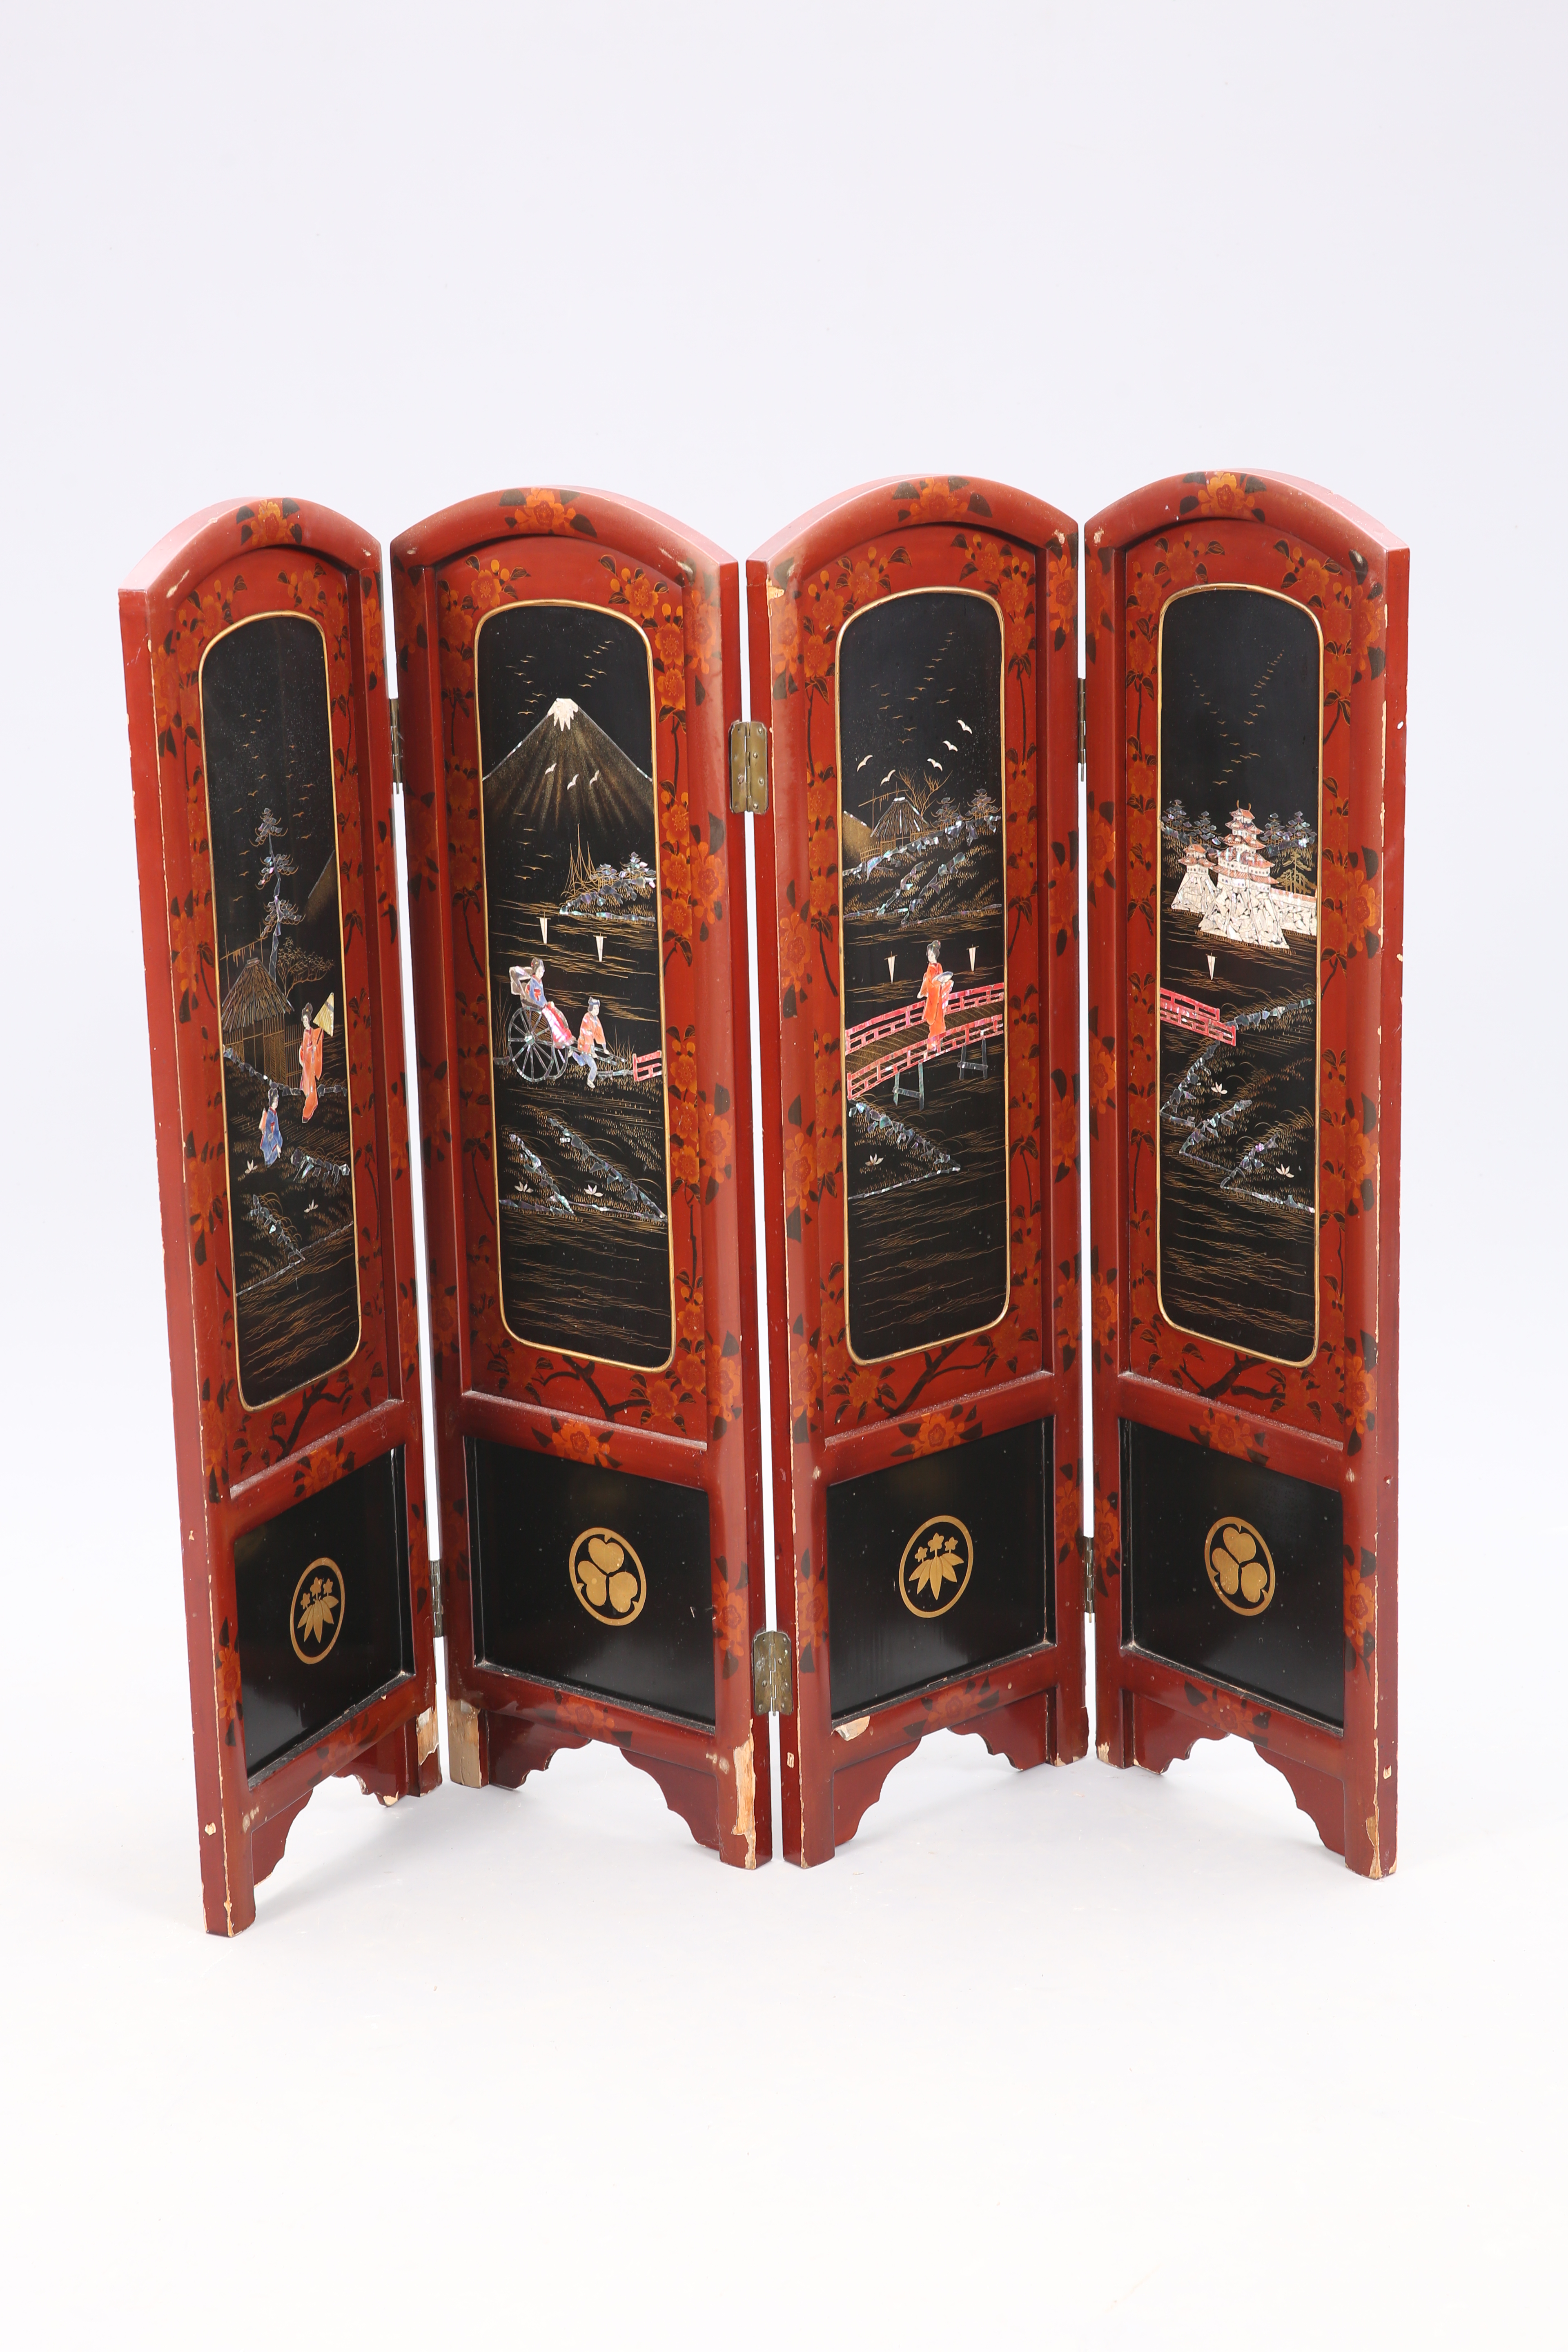 A JAPANESE TAISHO PERIOD LACQUER FOUR FOLD SCREEN